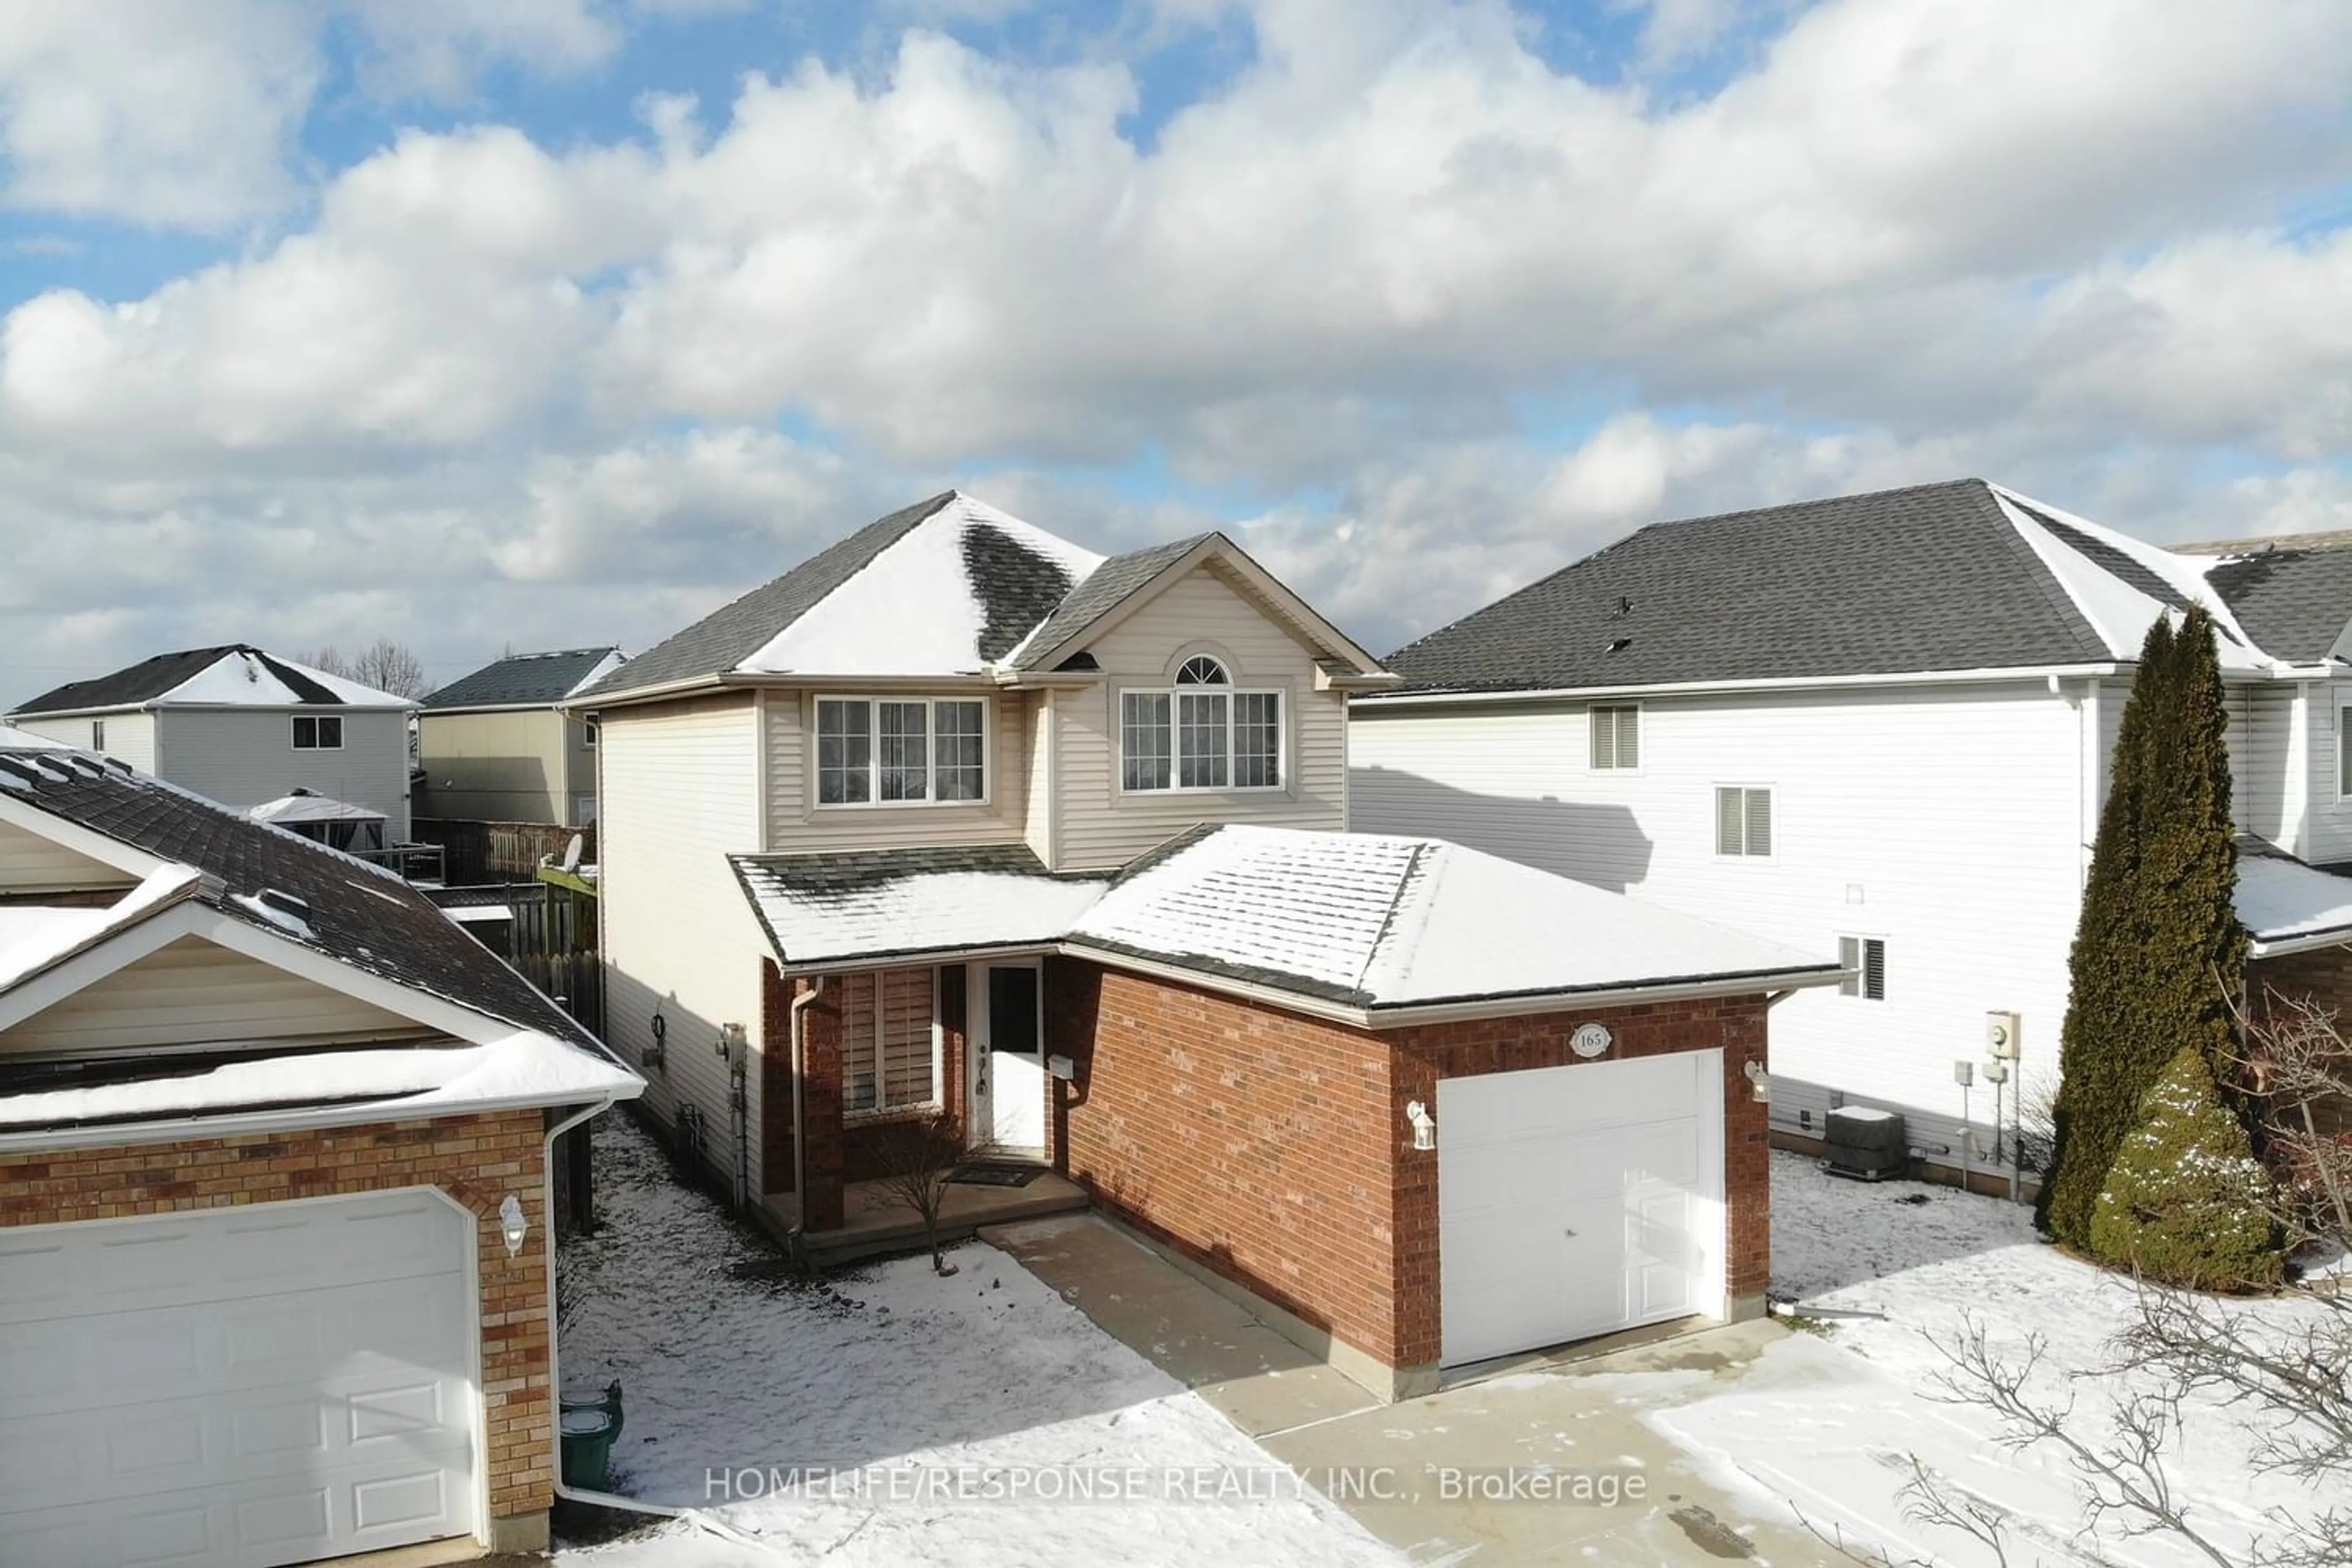 Frontside or backside of a home for 165 Dorchester Blvd, St. Catharines Ontario L2N 7Z2